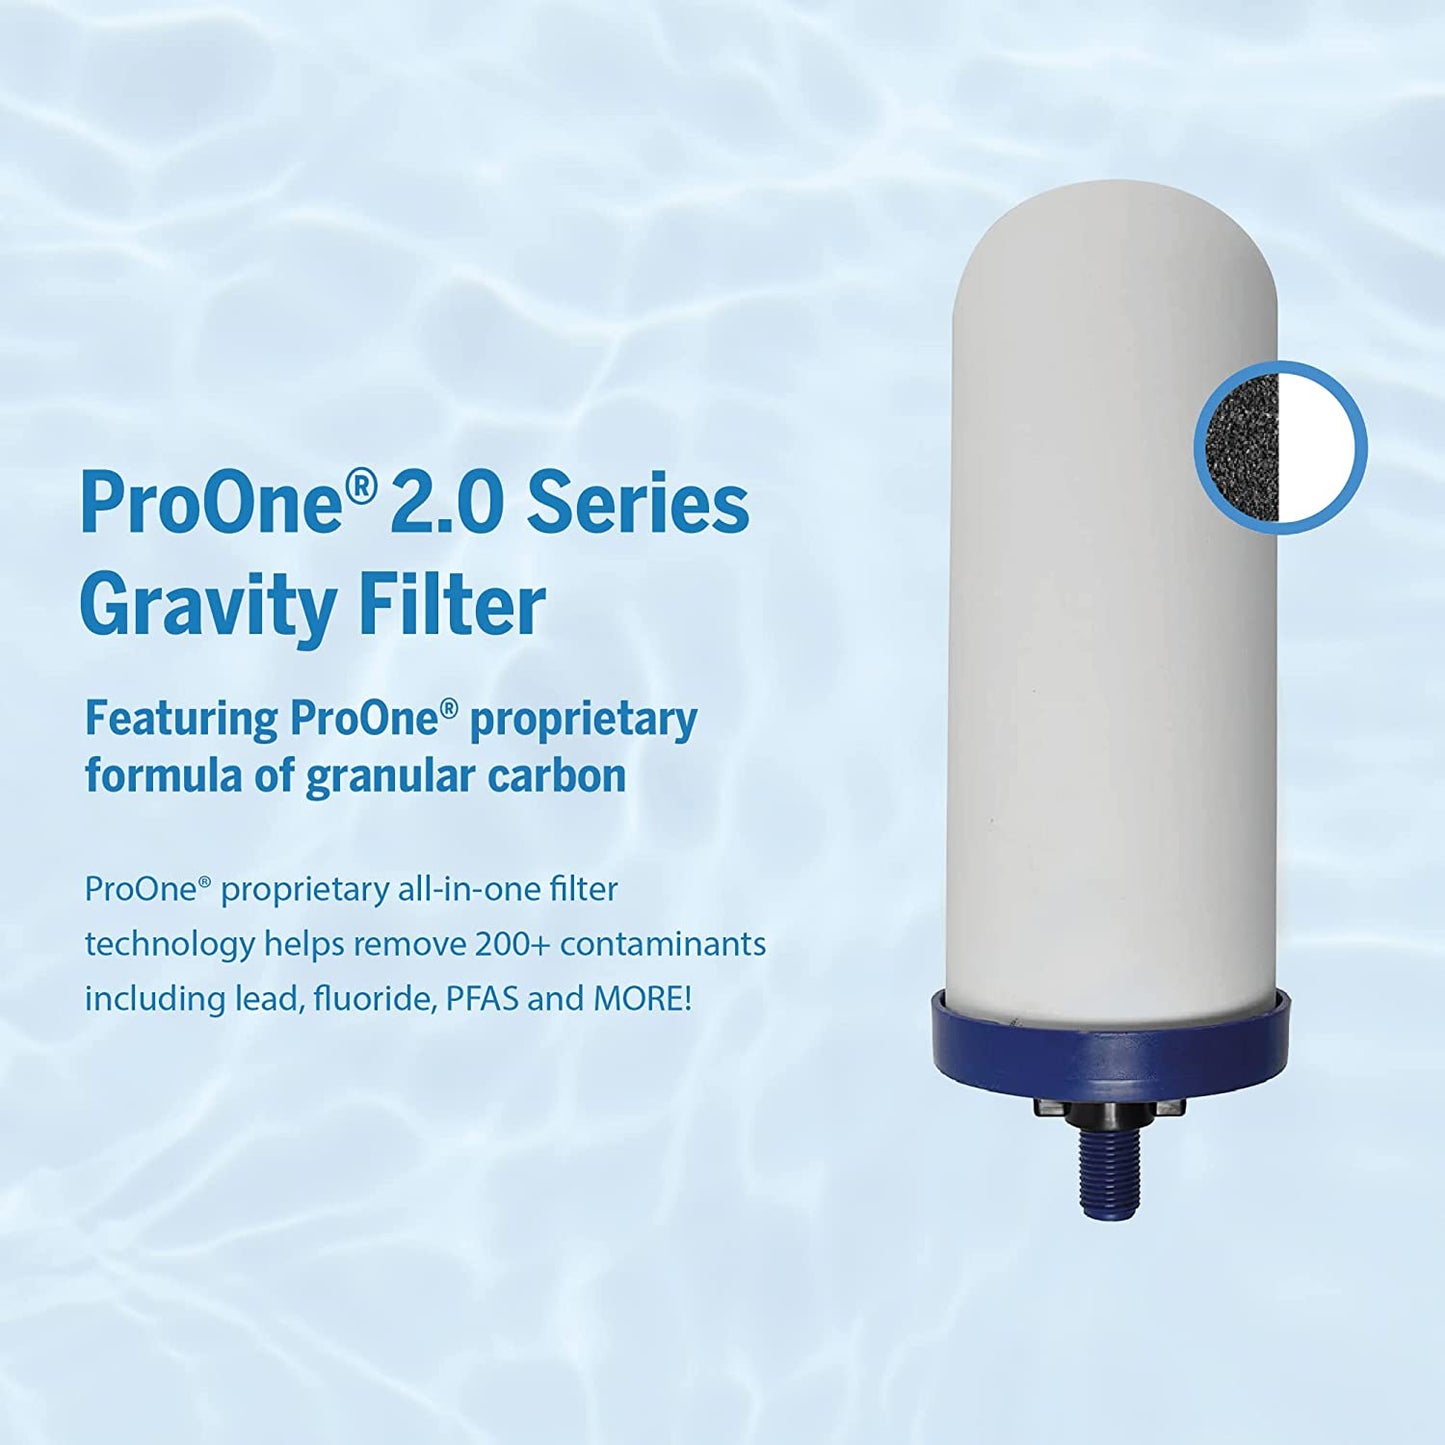 ProOne Big+ Stainless-Steel Gravity Water Filter System, 3-Gallon Water Capacity, Countertop Water Dispenser for Home, Camping, and Travel w/ (3) 9-inch Filters & Wire Stand